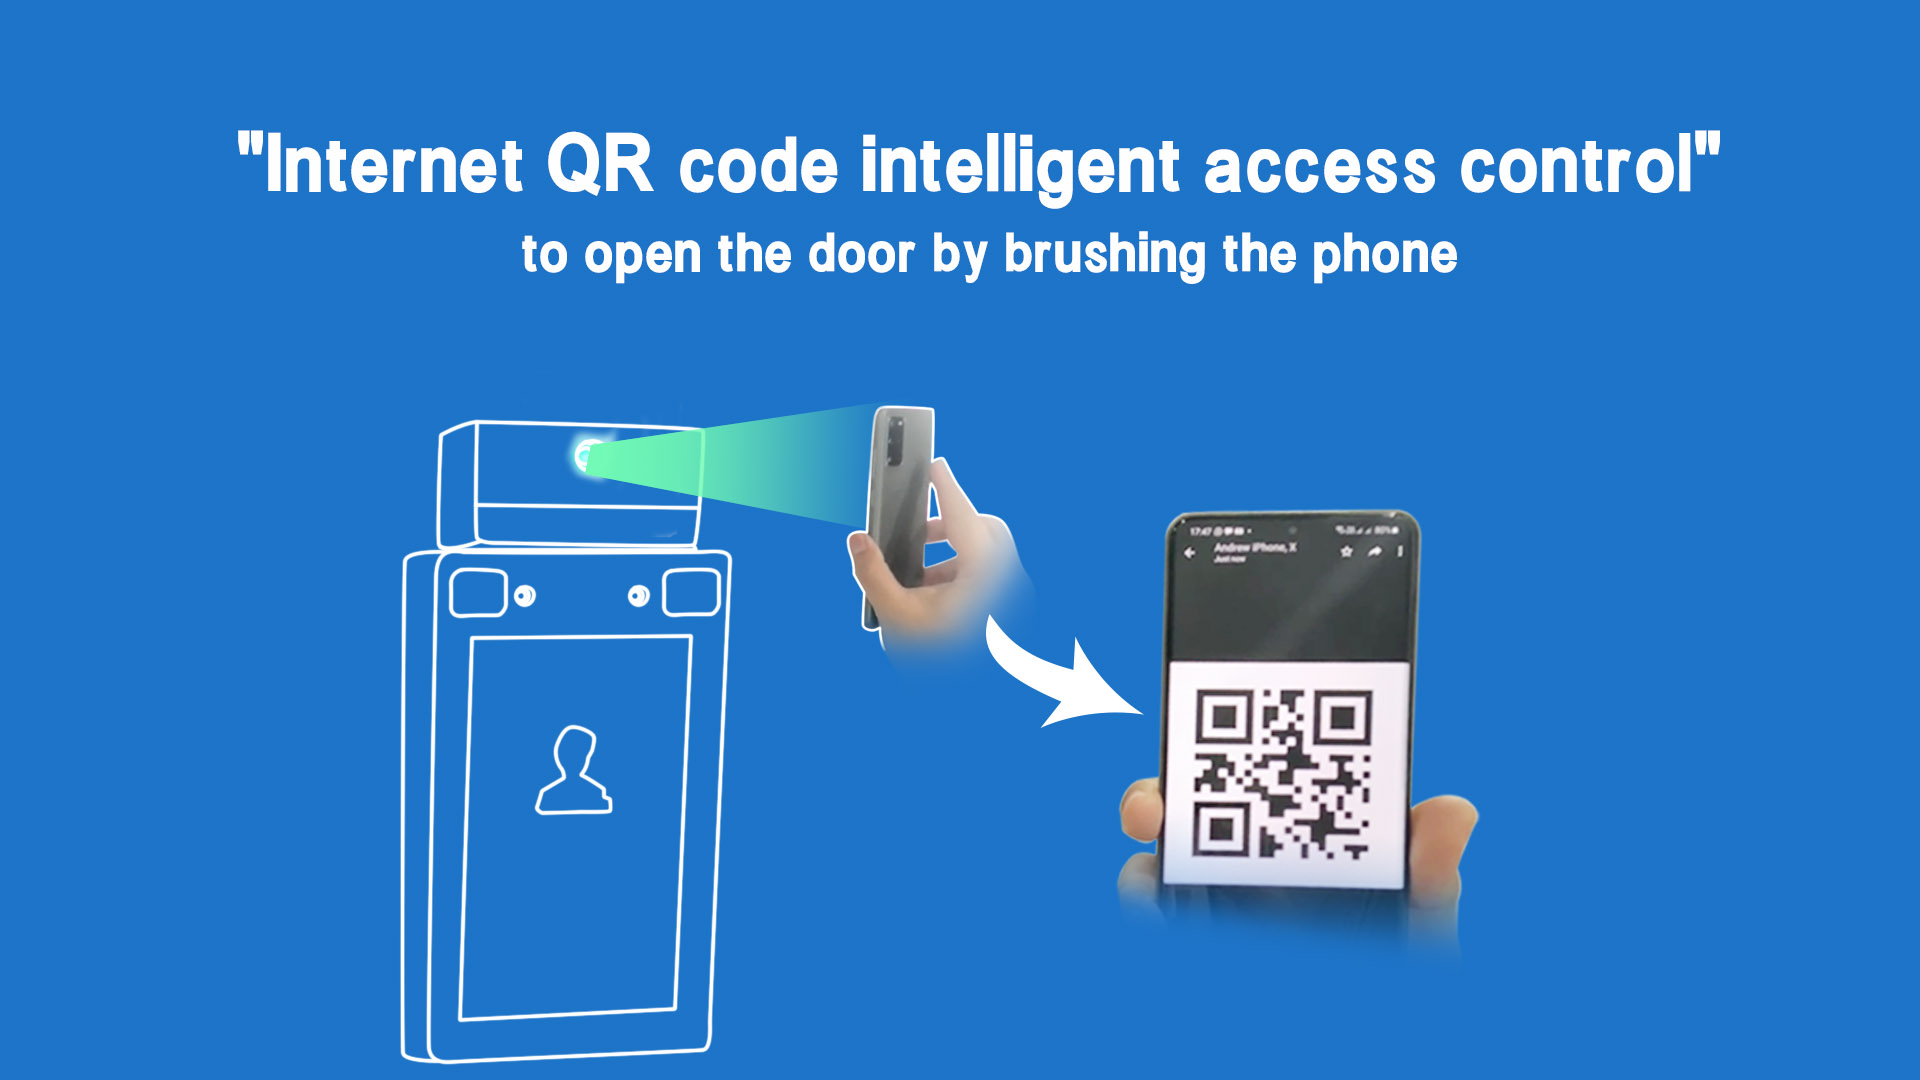 "Internet QR code intelligent access control" to open the door by brushing the phone